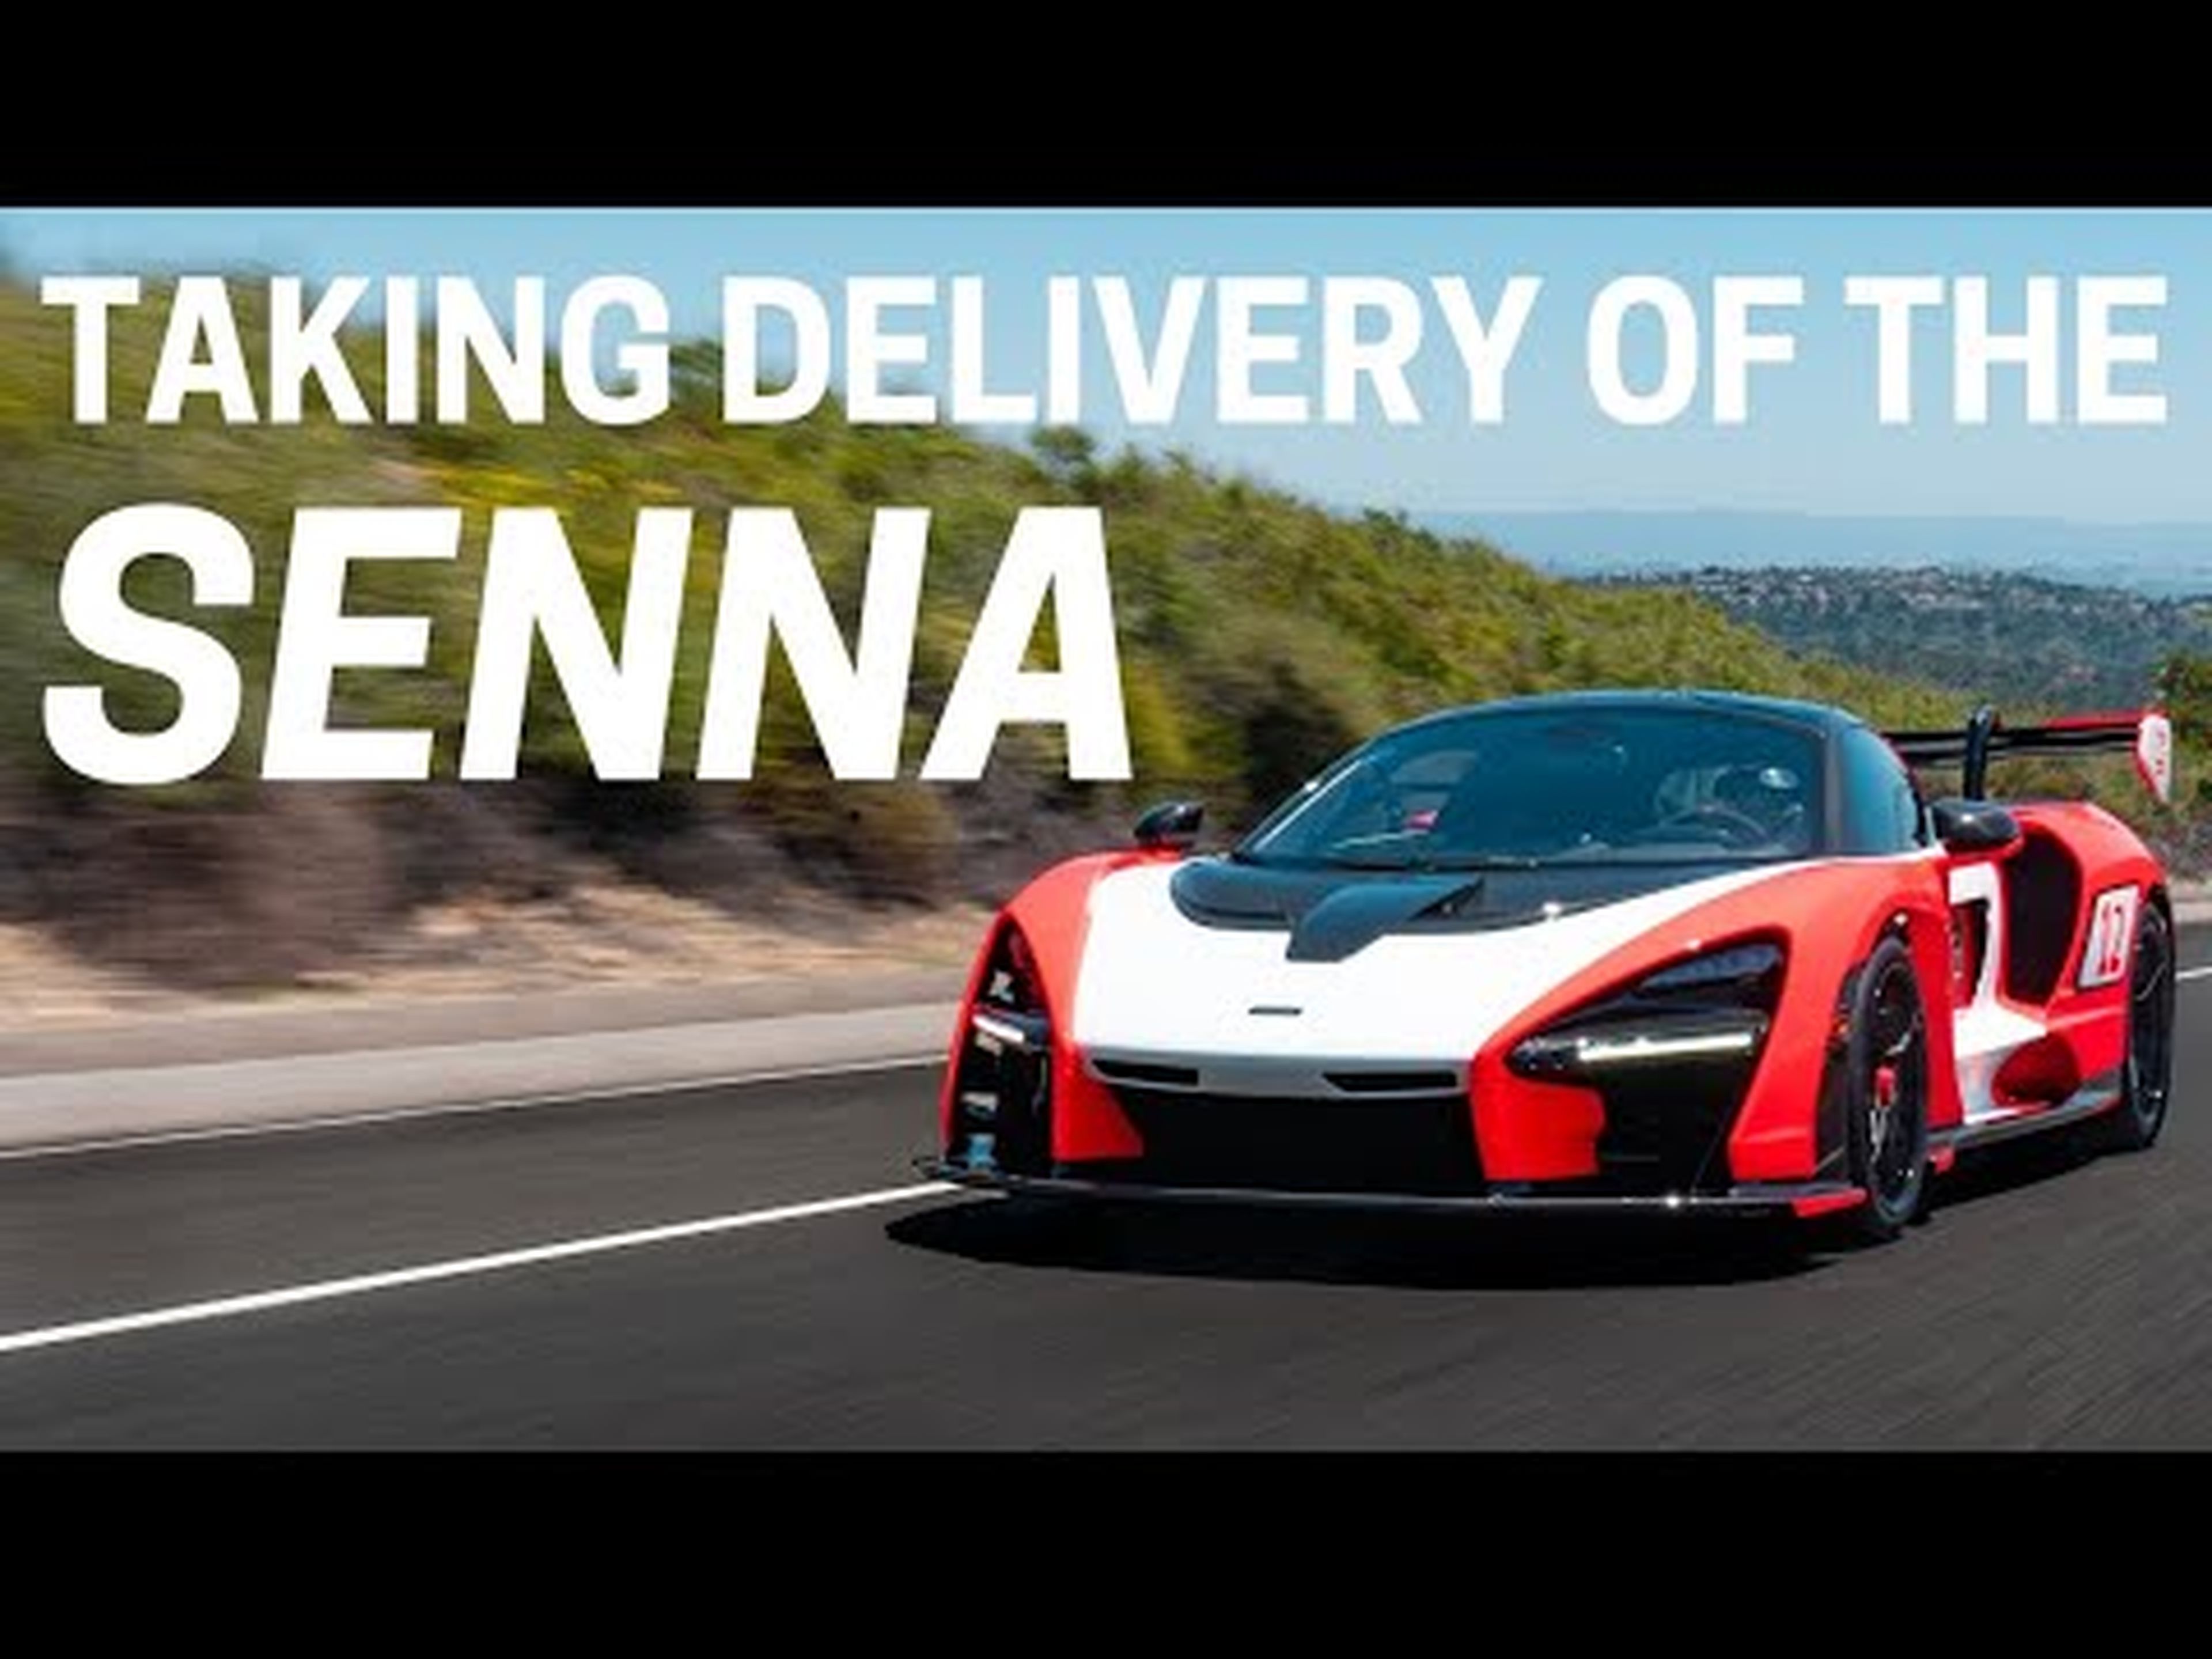 Taking Delivery of the McLaren Senna!